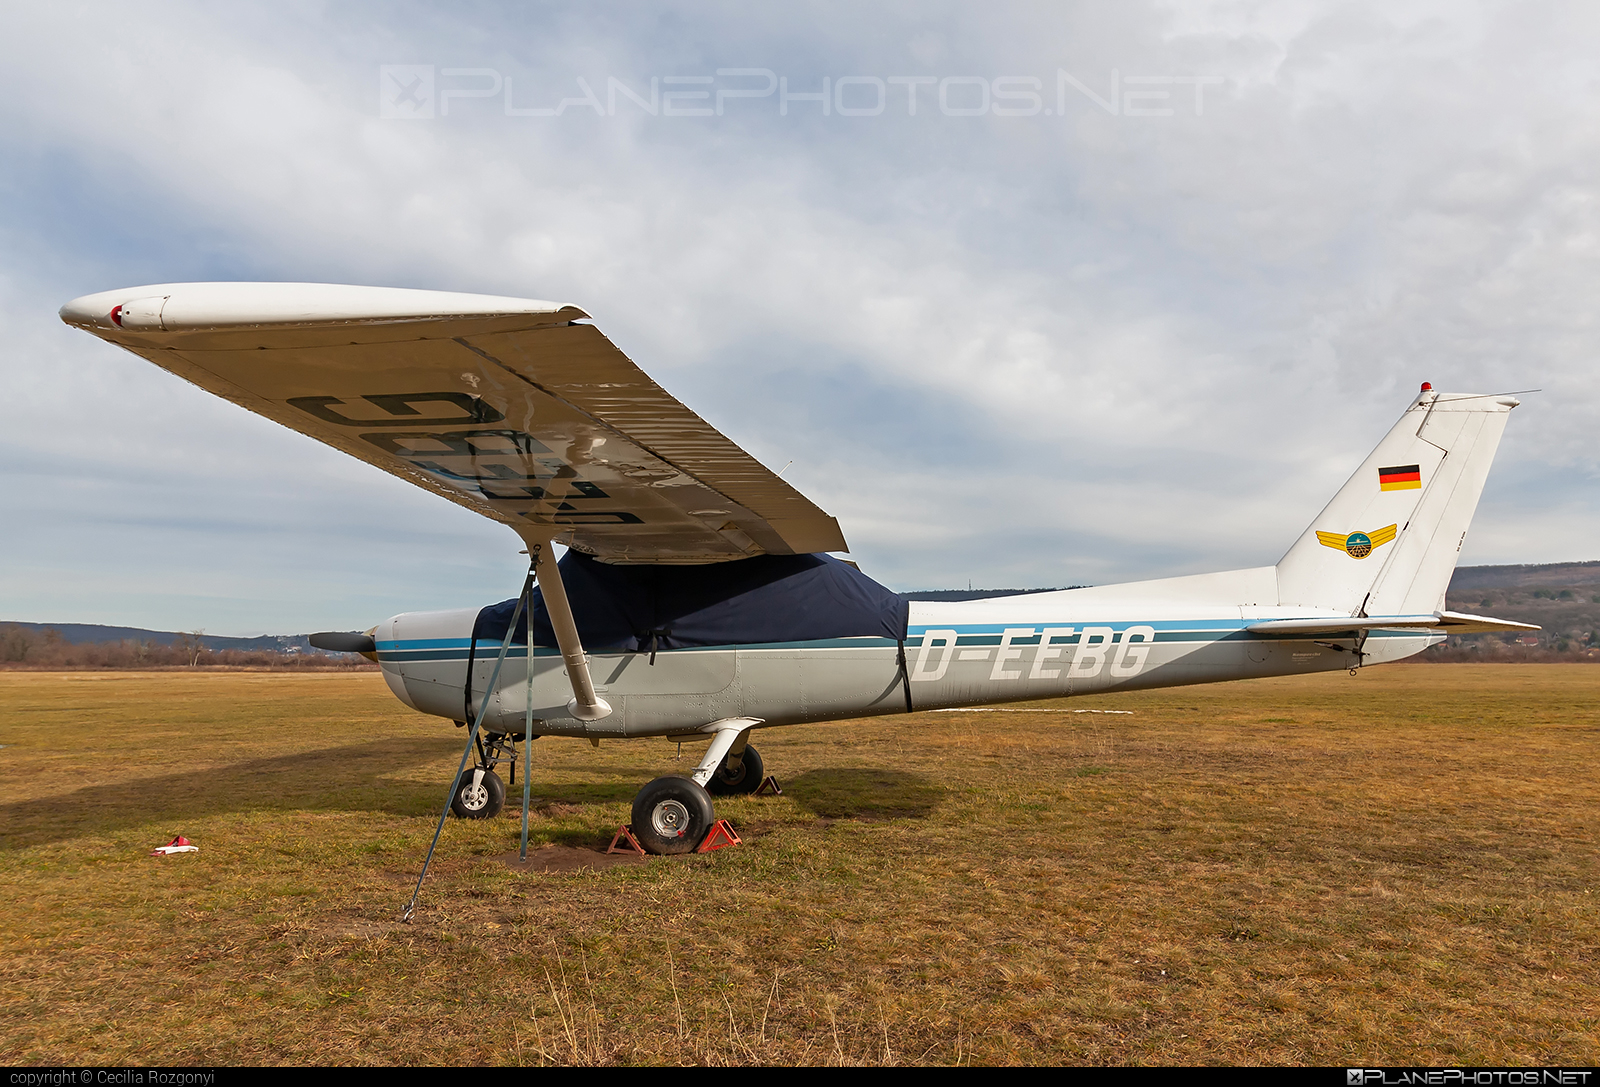 Reims F152 - D-EEBG operated by Private operator #cessna152 #reims #reims152 #reimsf152